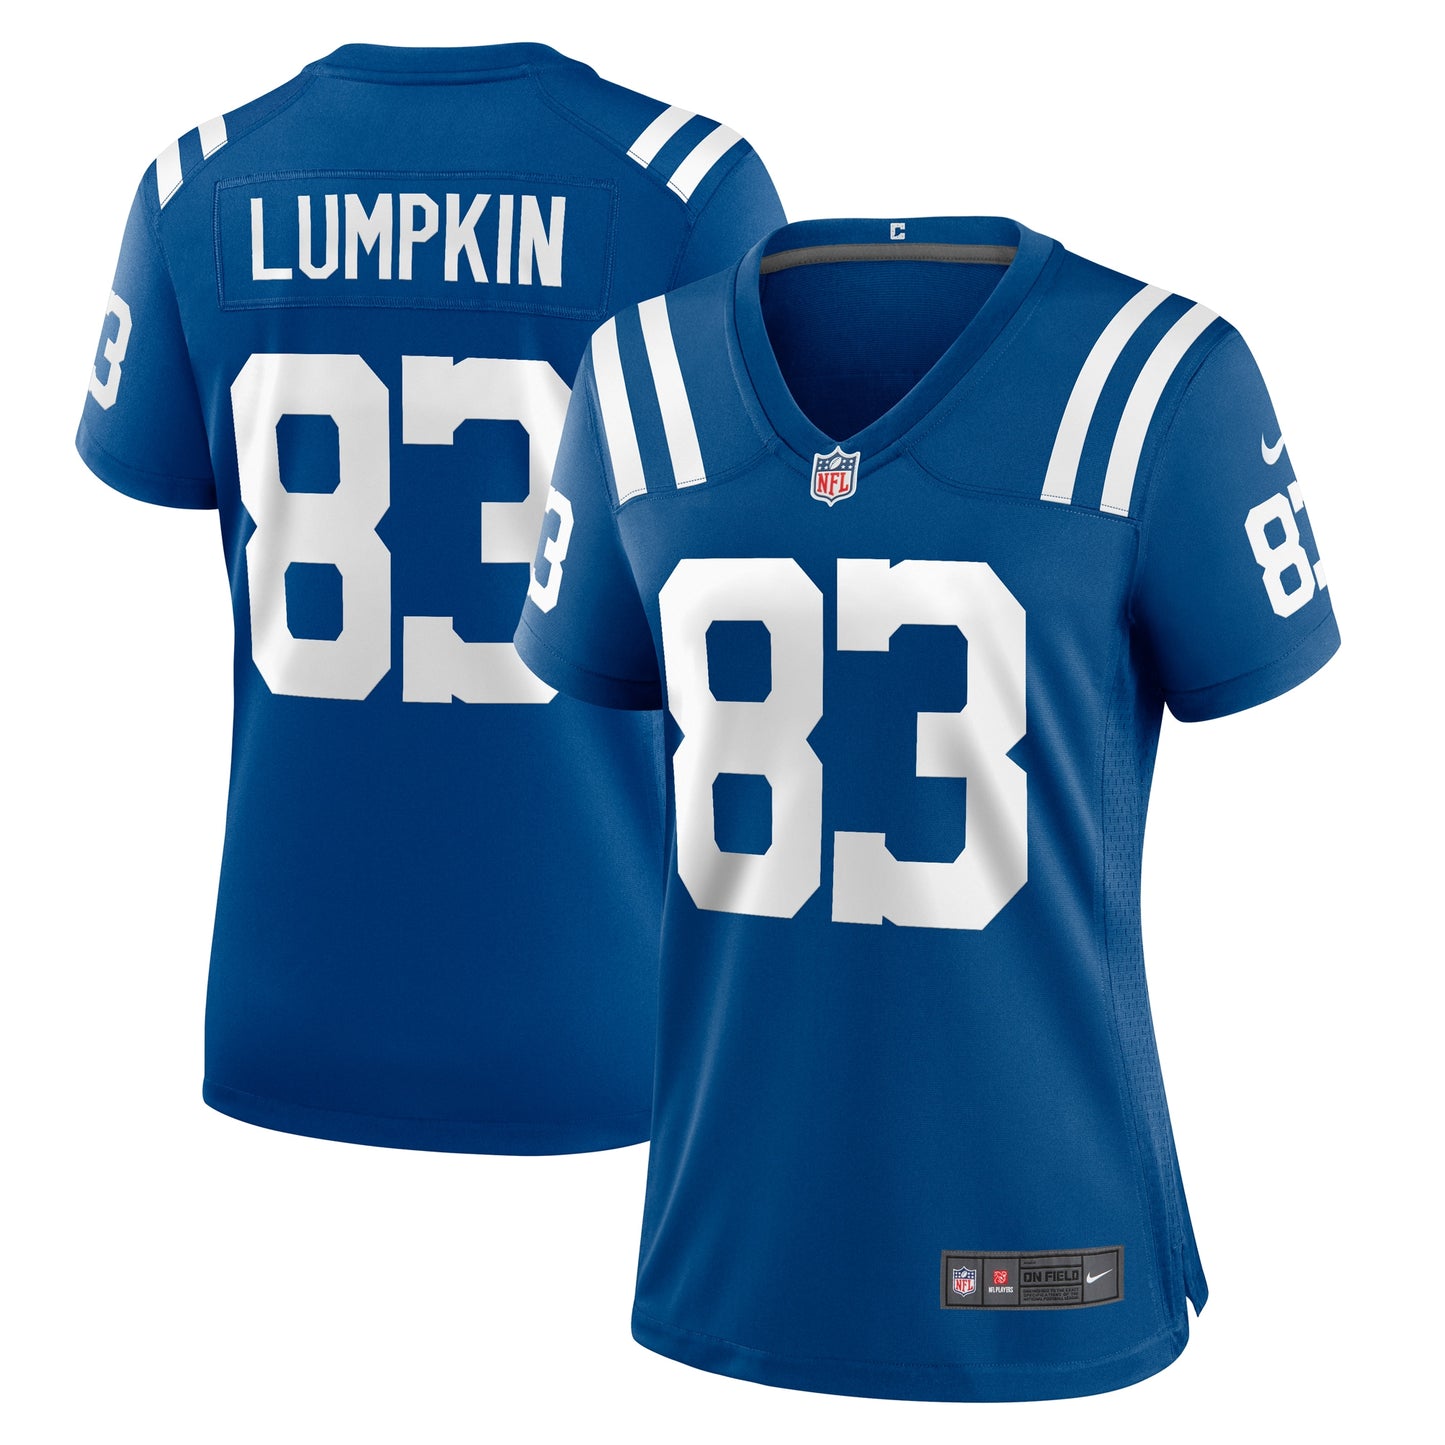 Johnny Lumpkin Indianapolis Colts Nike Women's Team Game Jersey - Royal